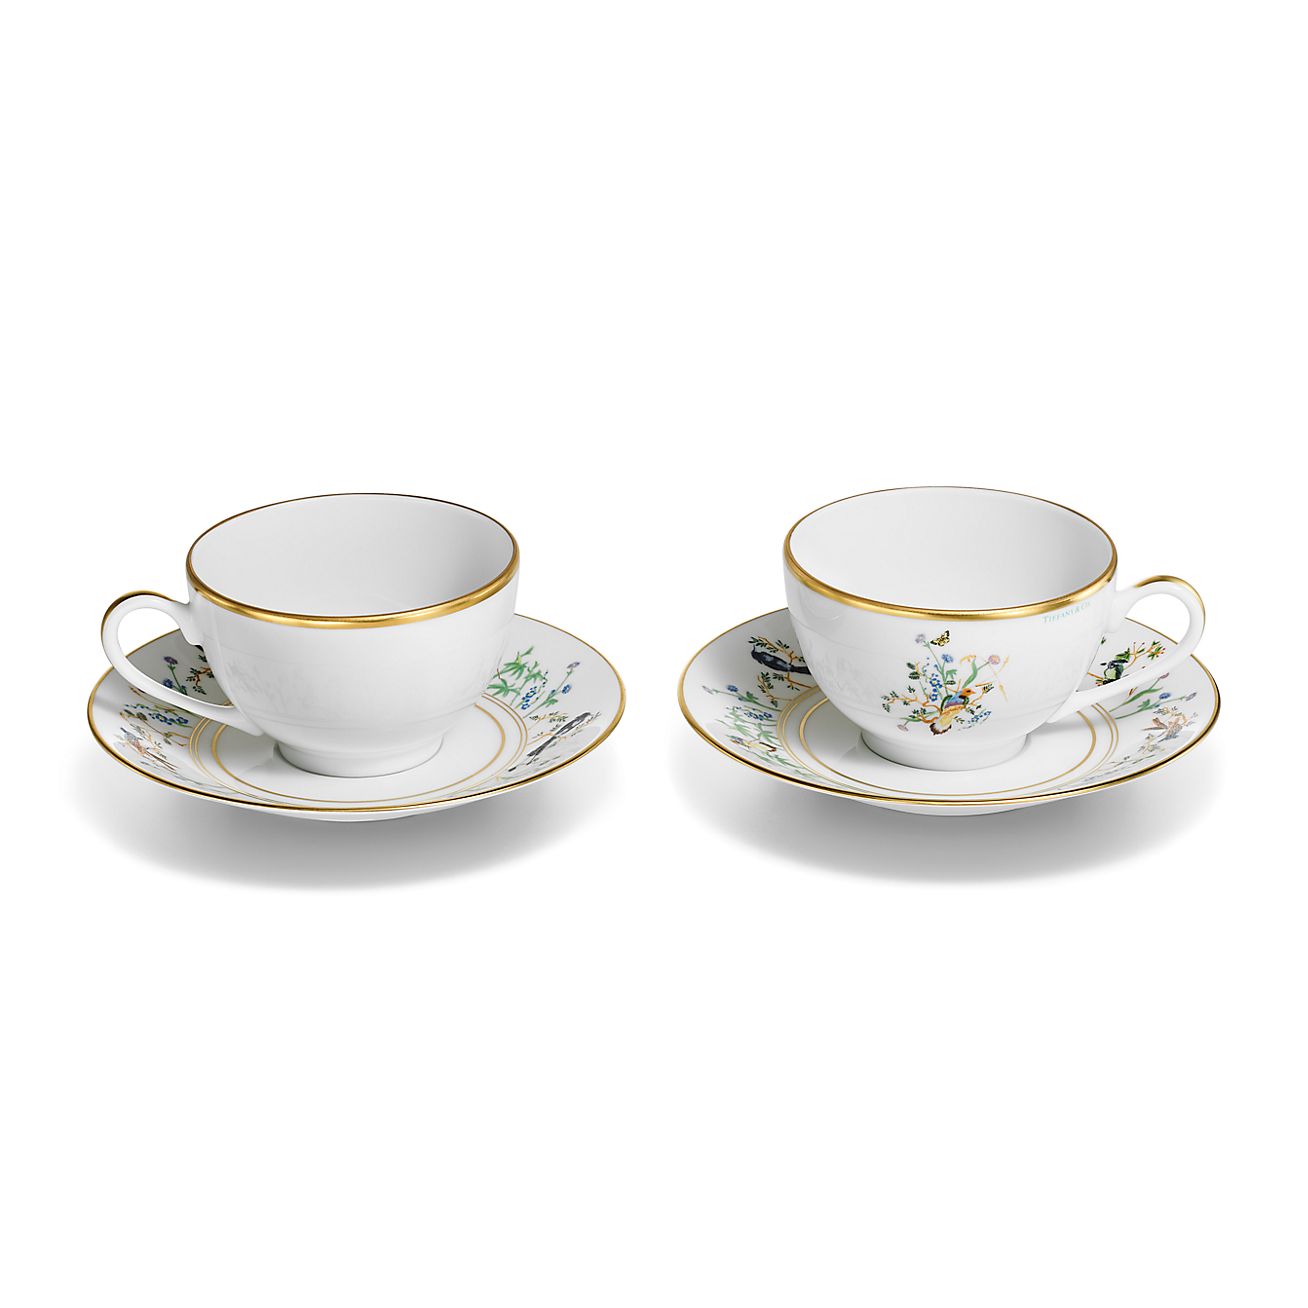 Tiffany Audubon Teacup and Saucer in Porcelain, Set of Two 